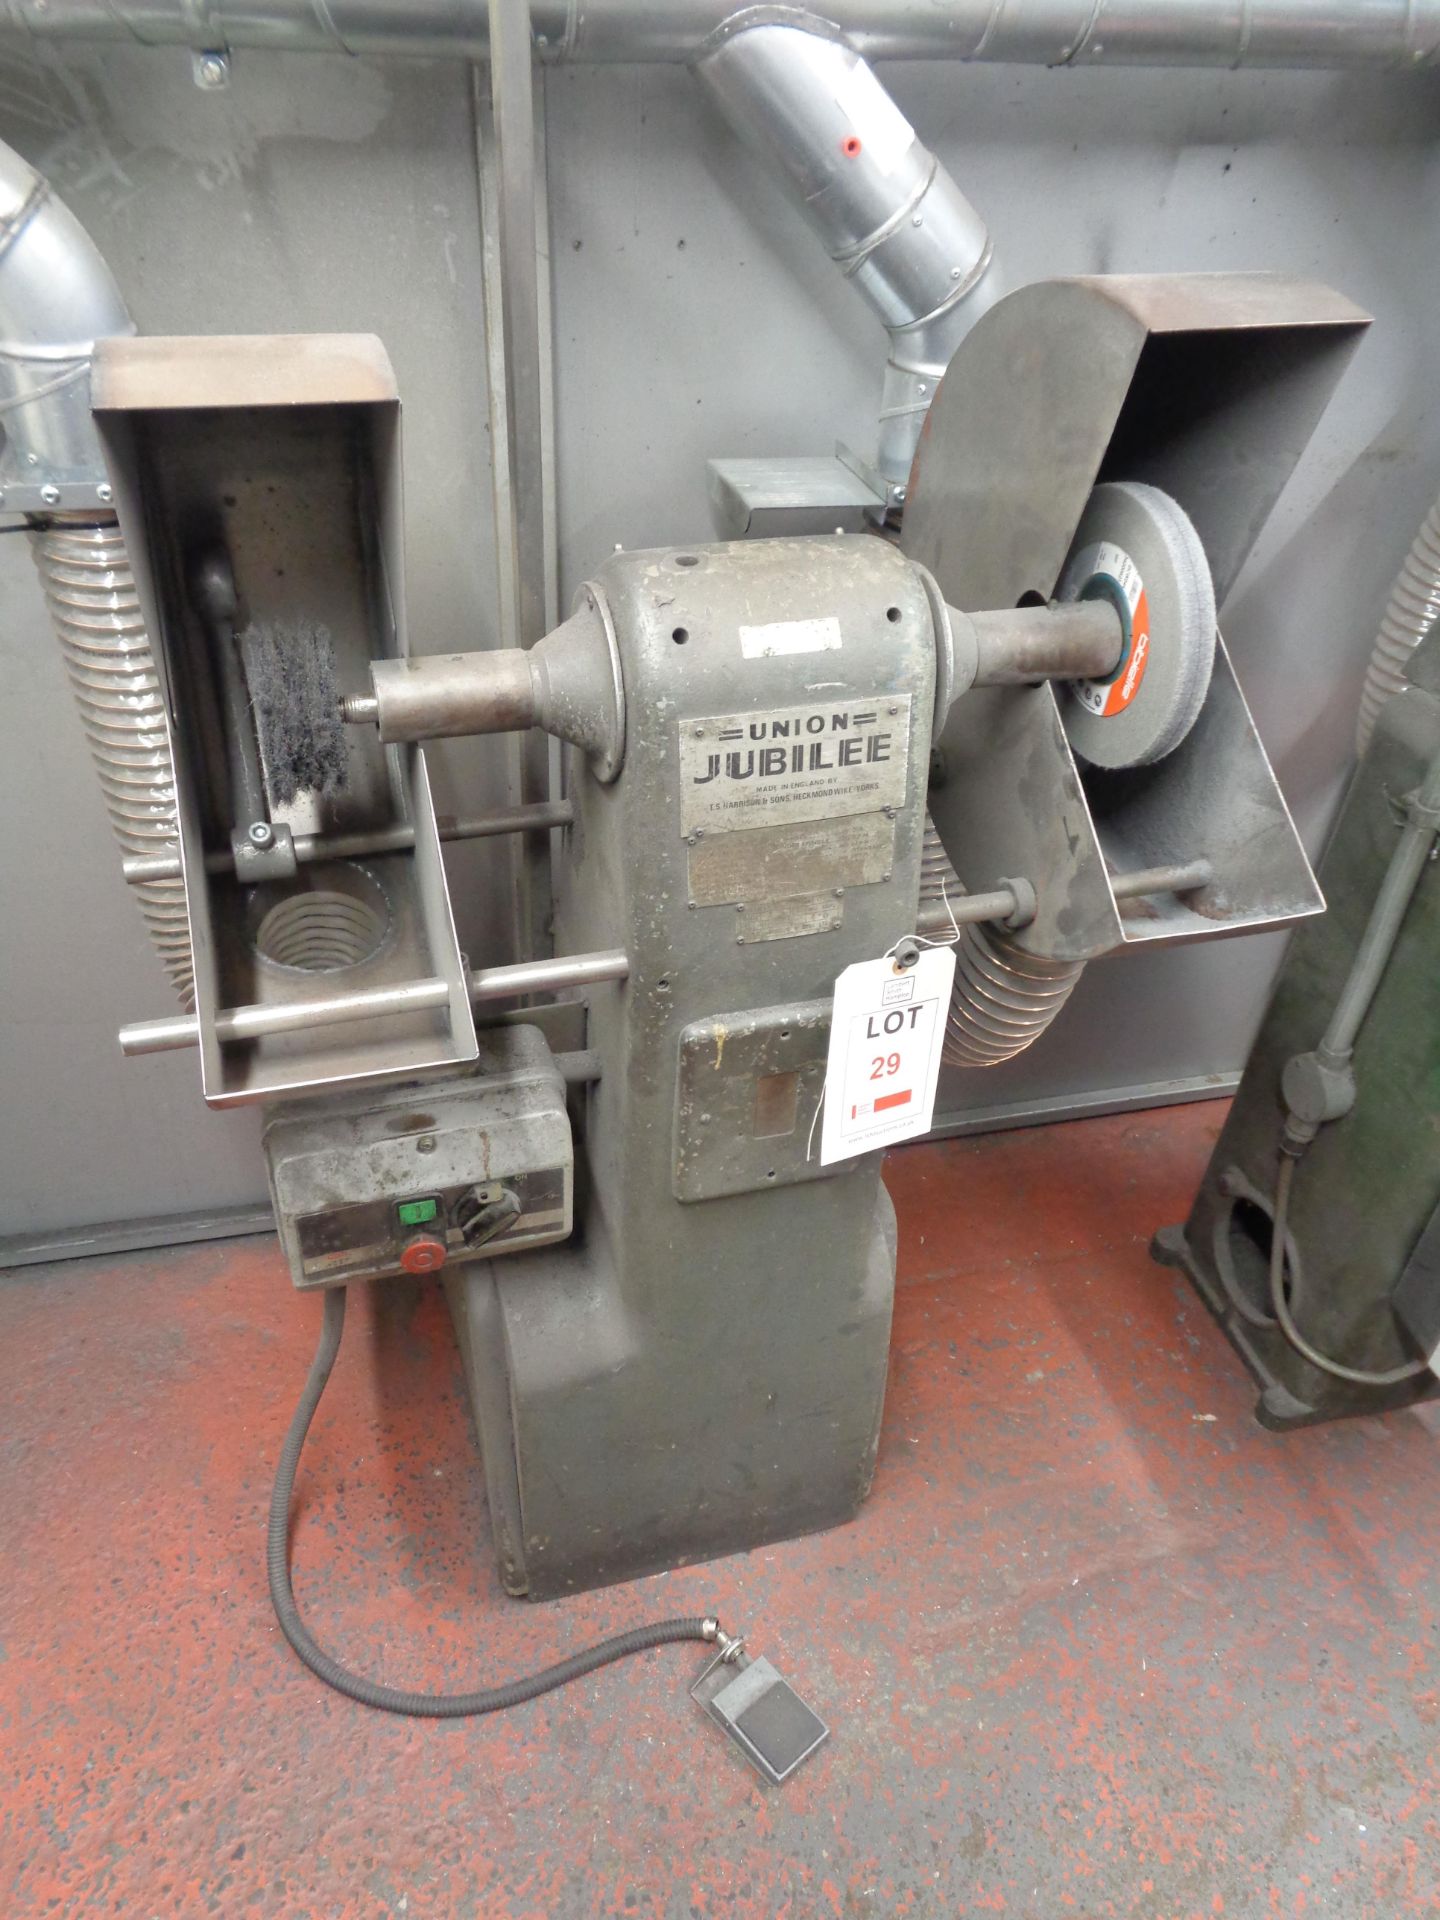 Union Jubilee double ended pedestal grinder serial no. 165983 - Image 2 of 4